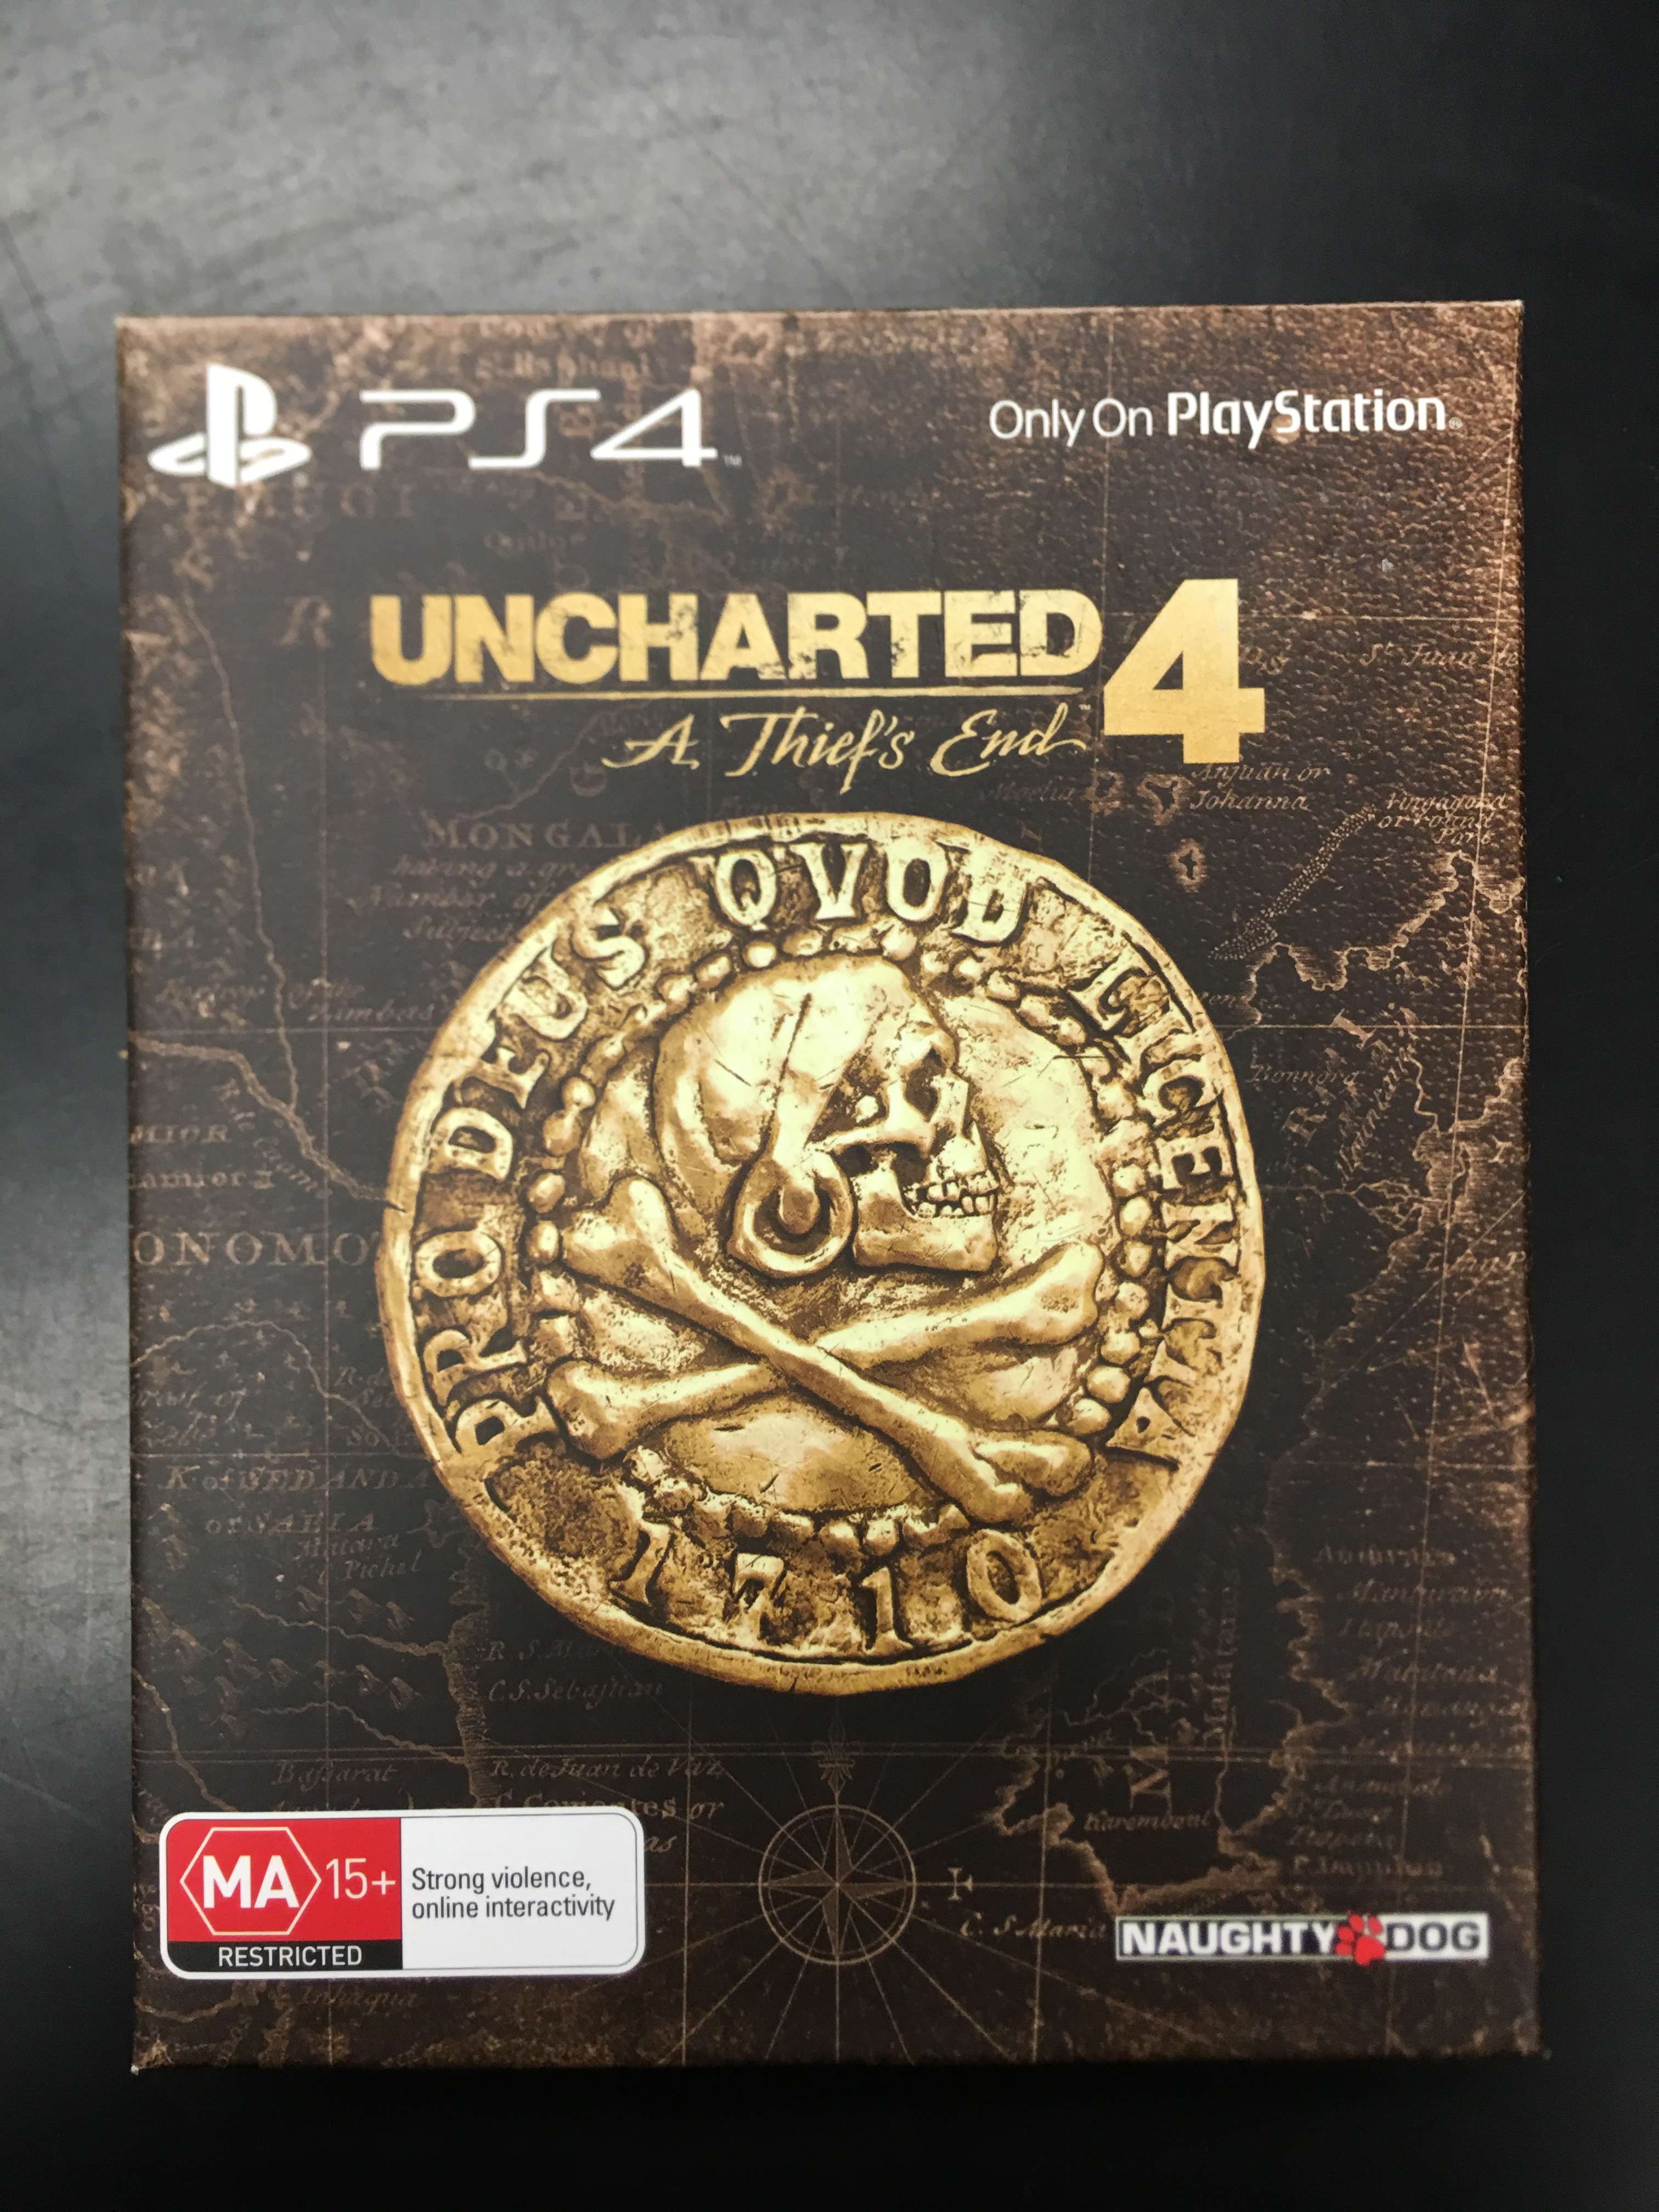 UNCHARTED 4 LIMITED EDITION